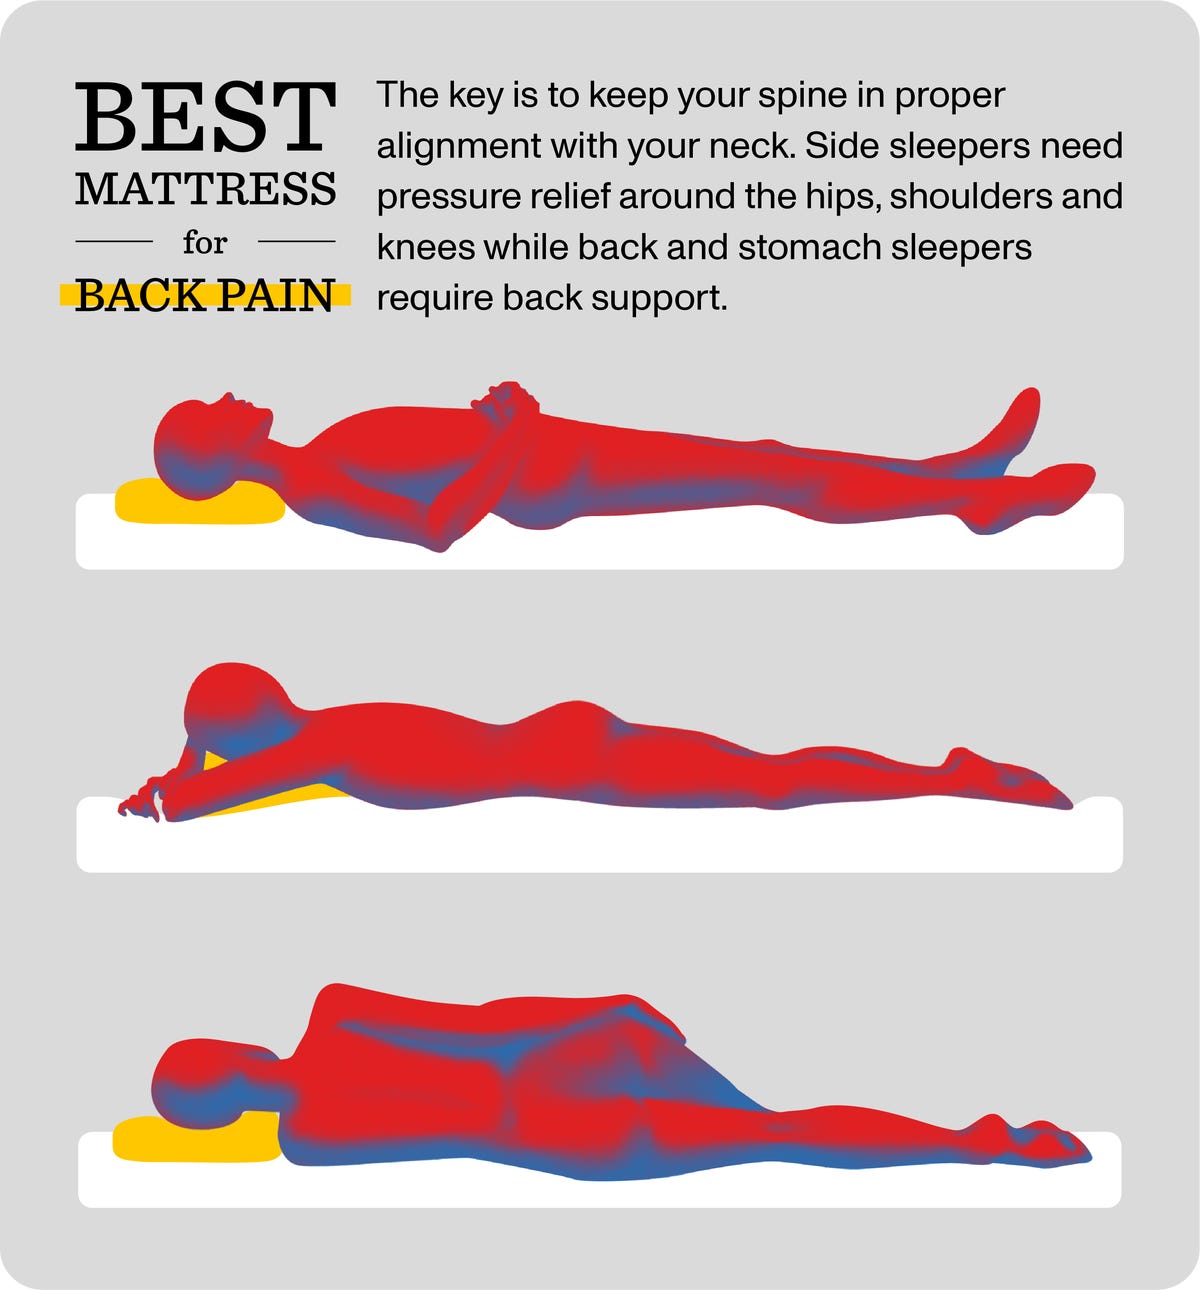 Best mattress for back pain graphic showing pressure points for different sleepers.